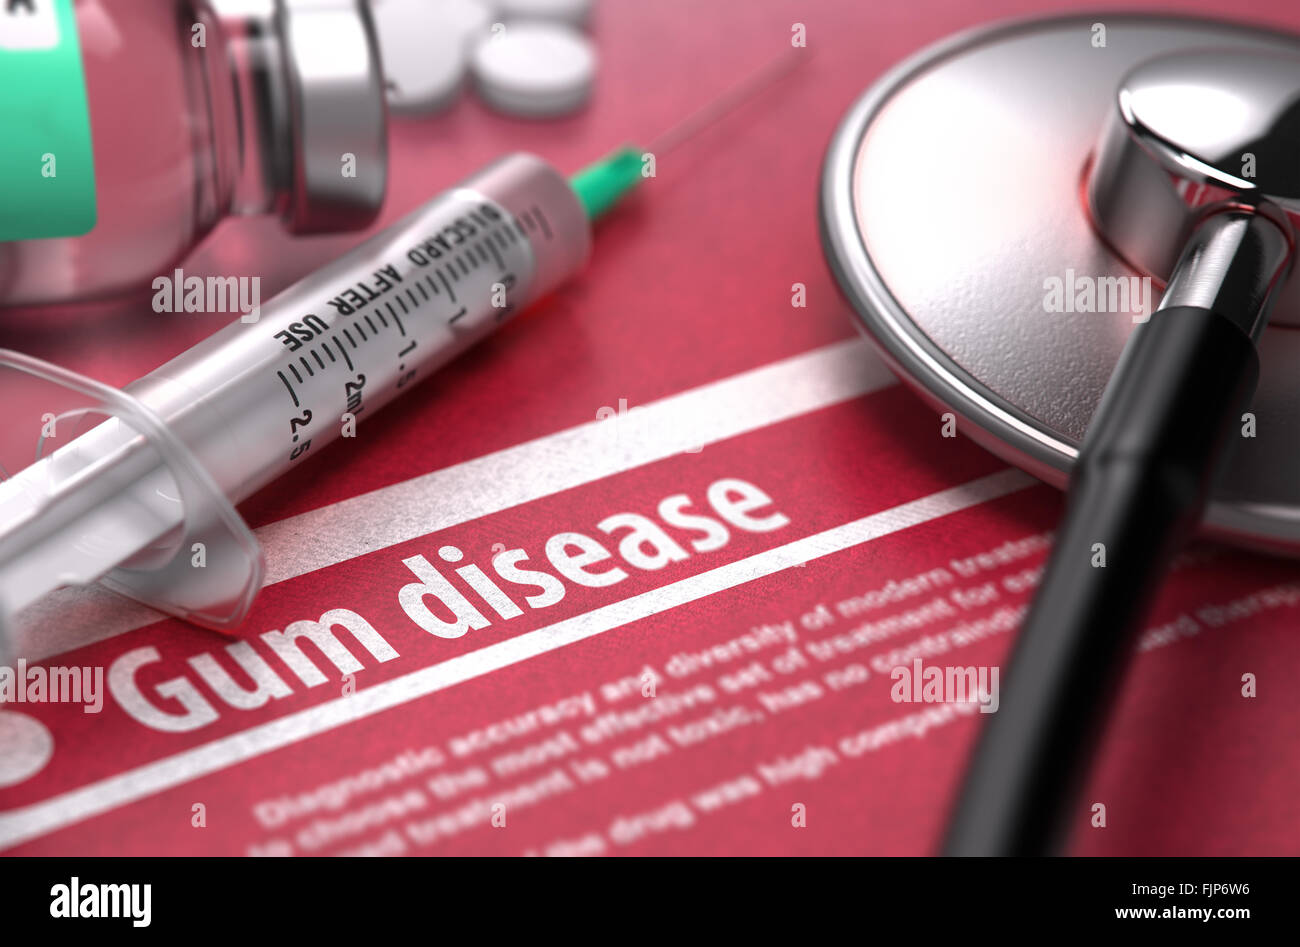 Gum disease - Printed Diagnosis on Red Background. Stock Photo